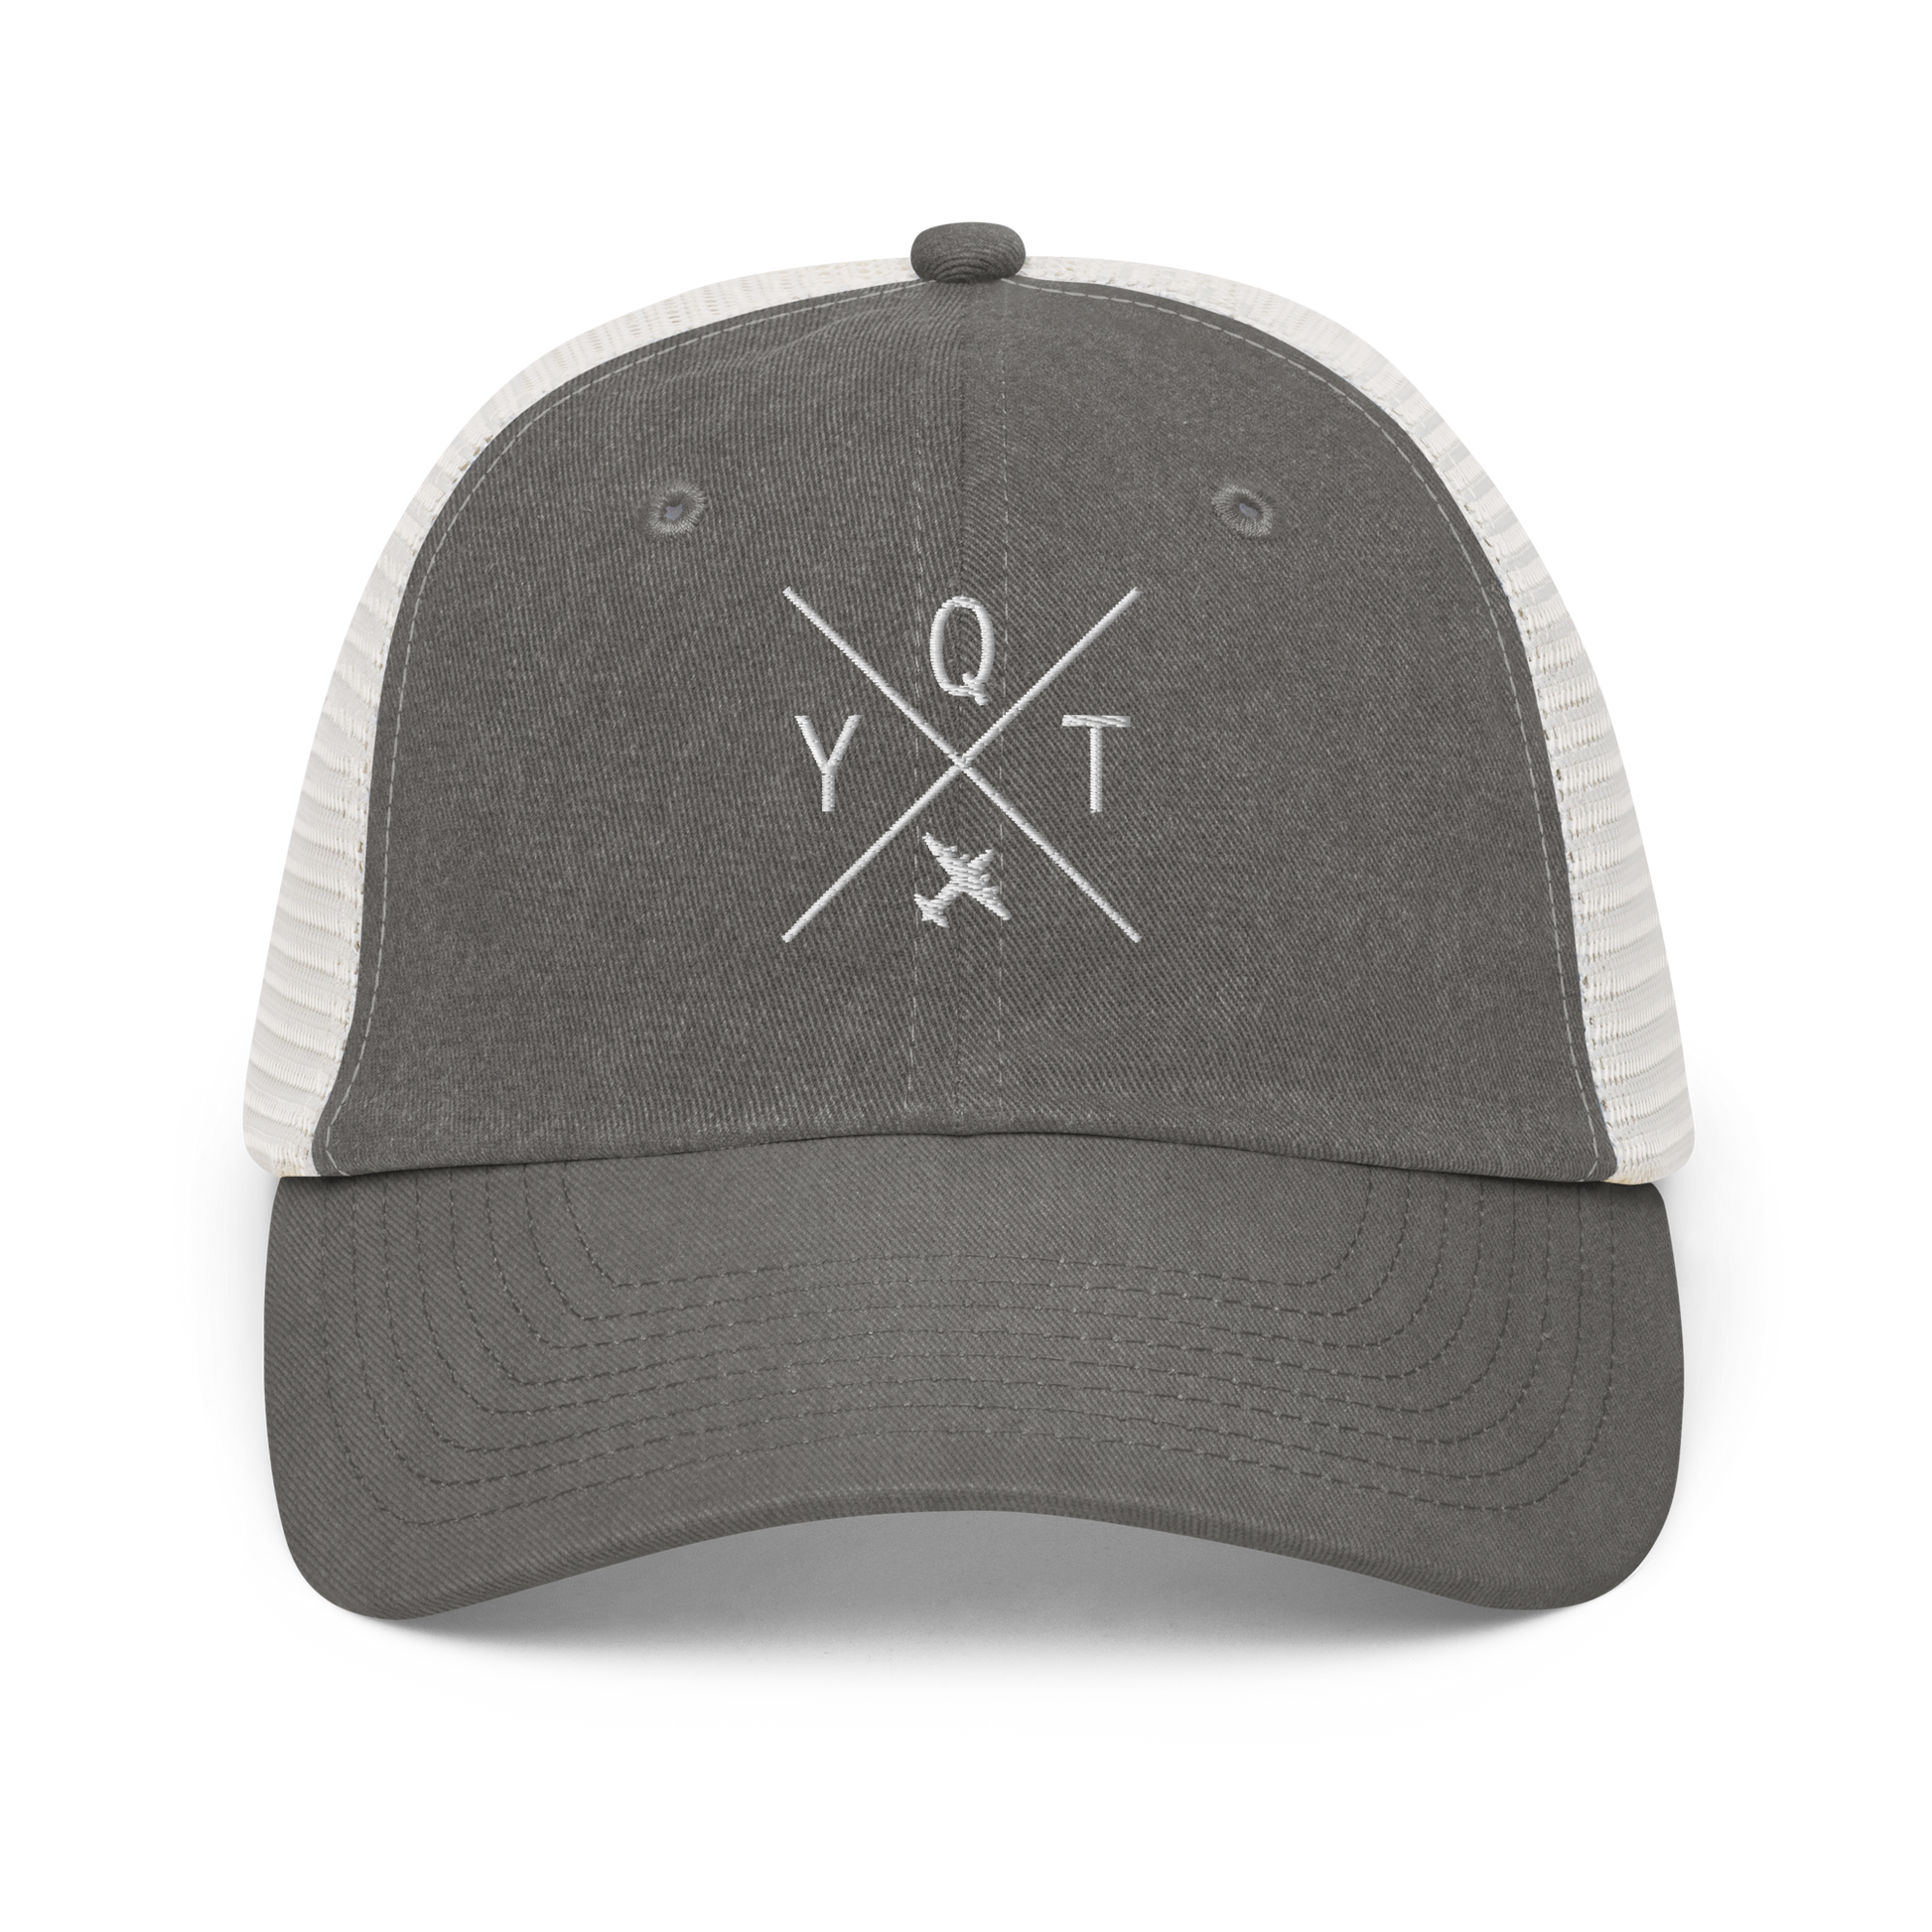 YHM Designs - YQT Thunder Bay Pigment-Dyed Trucker Cap - Crossed-X Design with Airport Code and Vintage Propliner - White Embroidery - Image 09